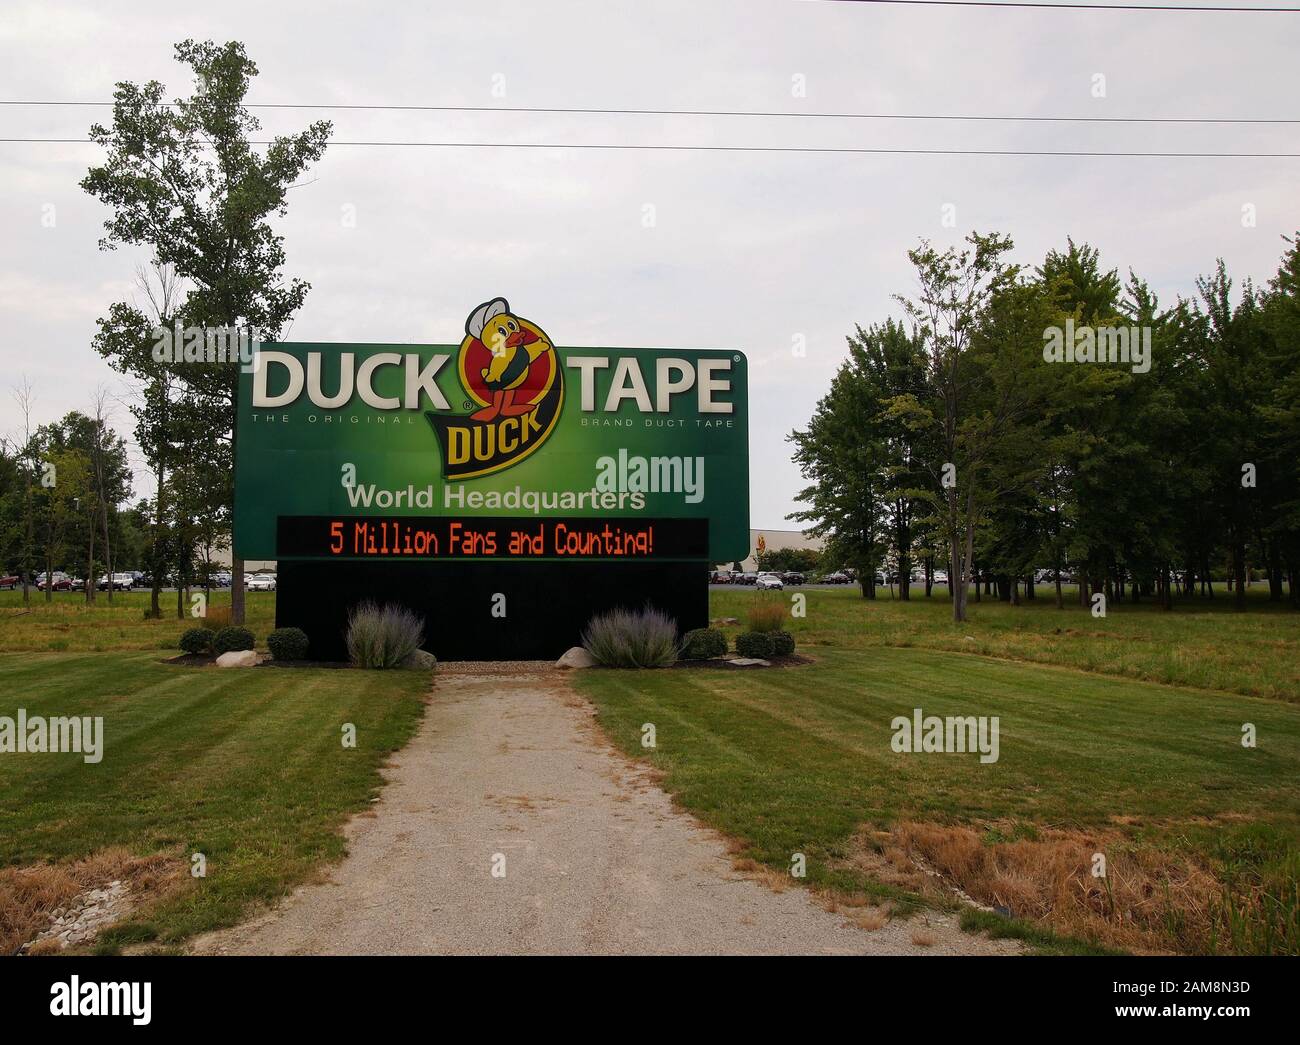 AVON, OHIO - JULY 30, 2018: A giant sign for the Duck Tape World Headquarters featuring the iconic duck logo greets visitors as they enter the parking Stock Photo